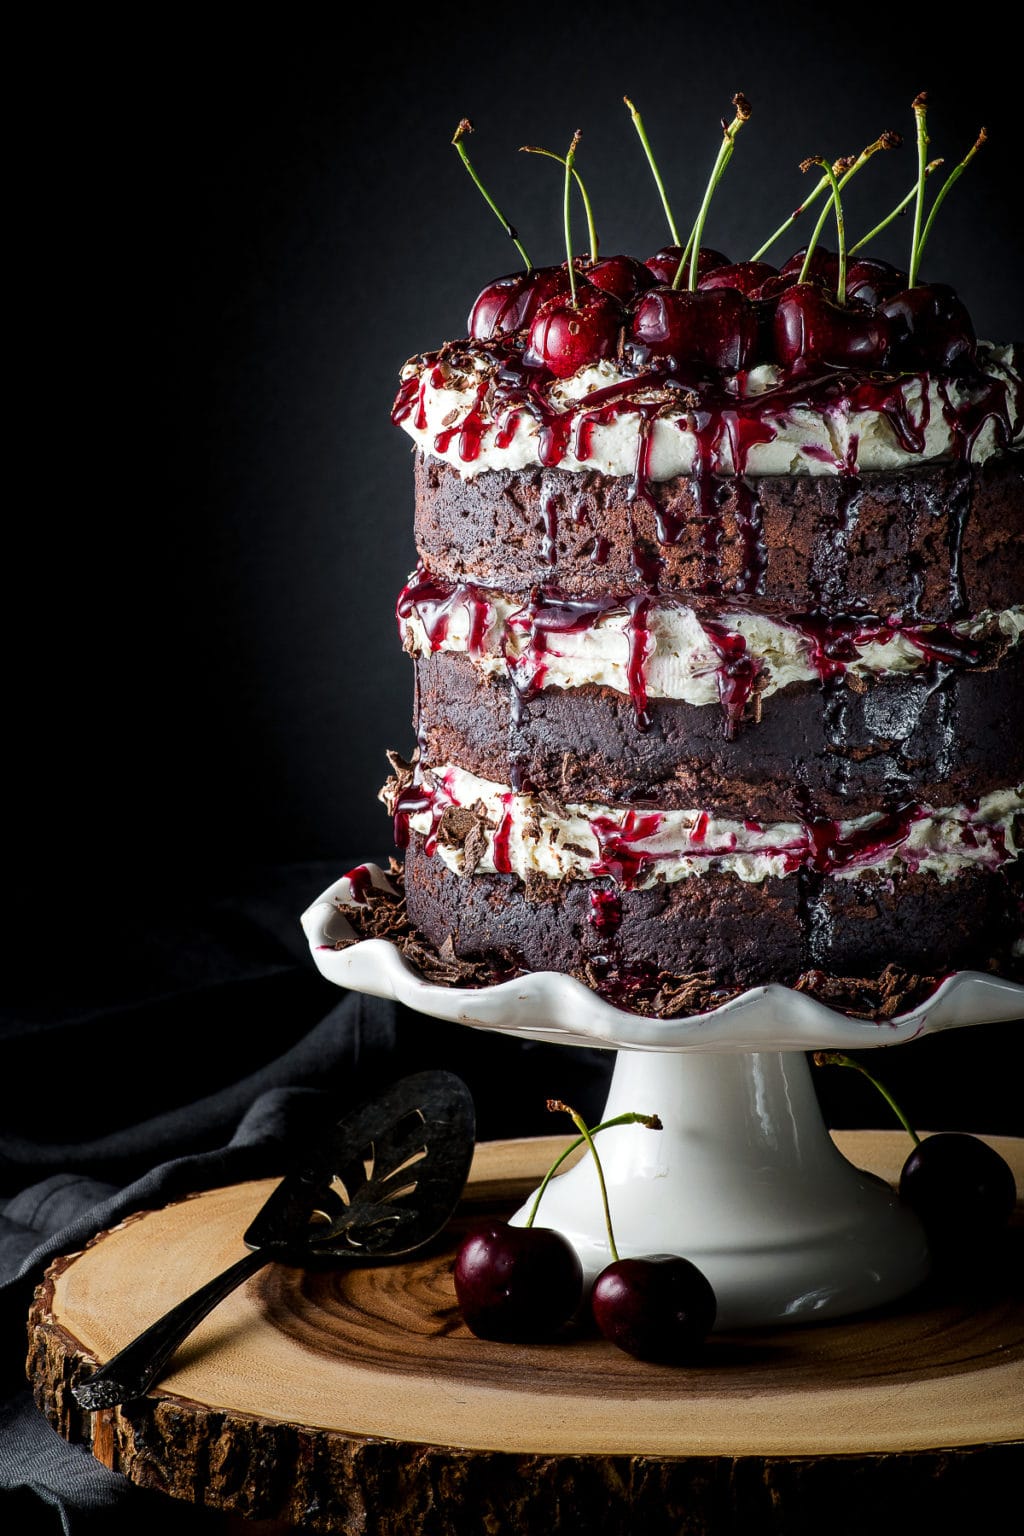 Black forest cake on a white cake stand, covered in fresh cherries against a dark black background.